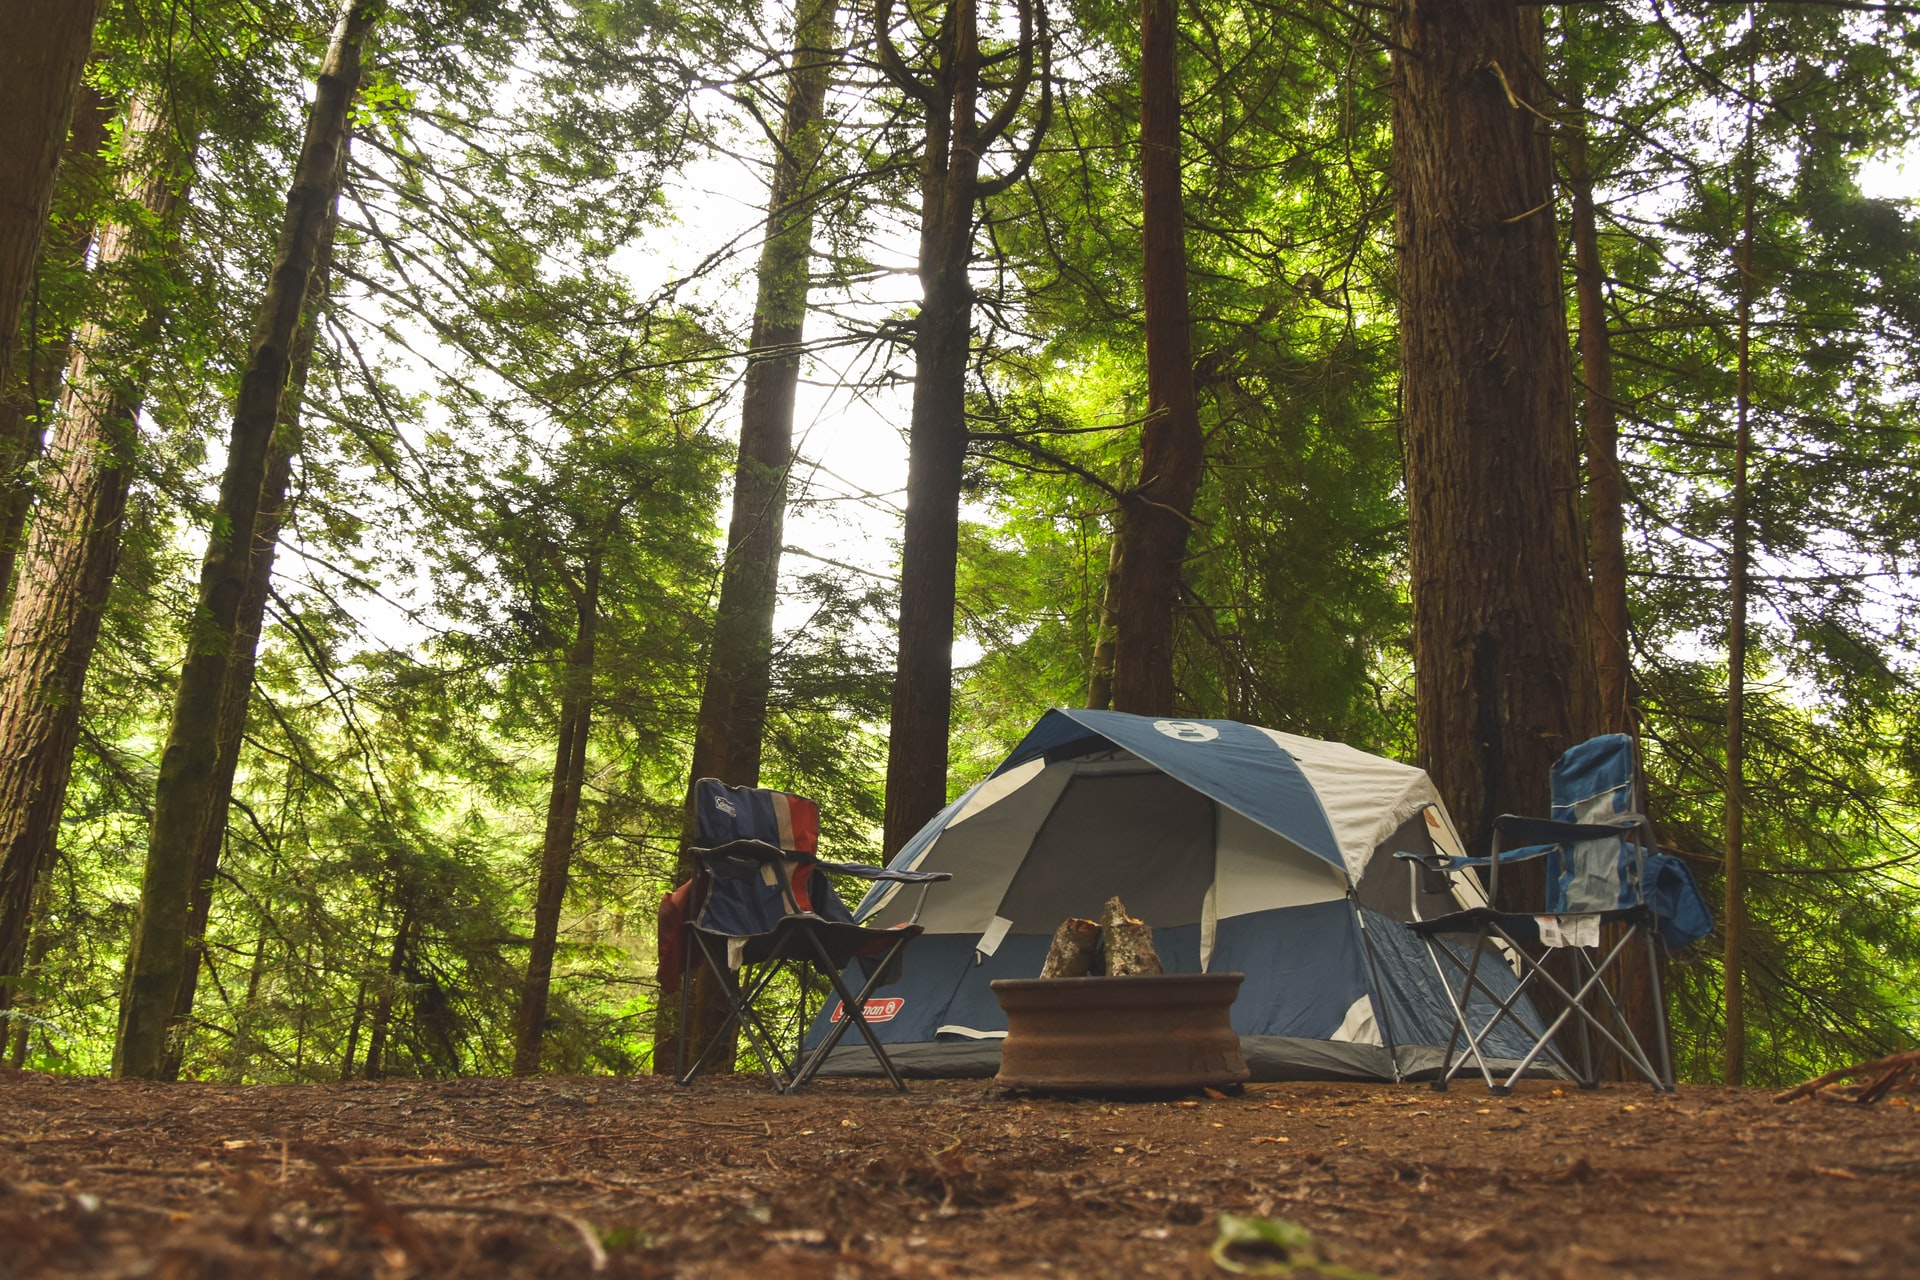 8 Best Tent Heaters for Camping in 2022: Buying Guide